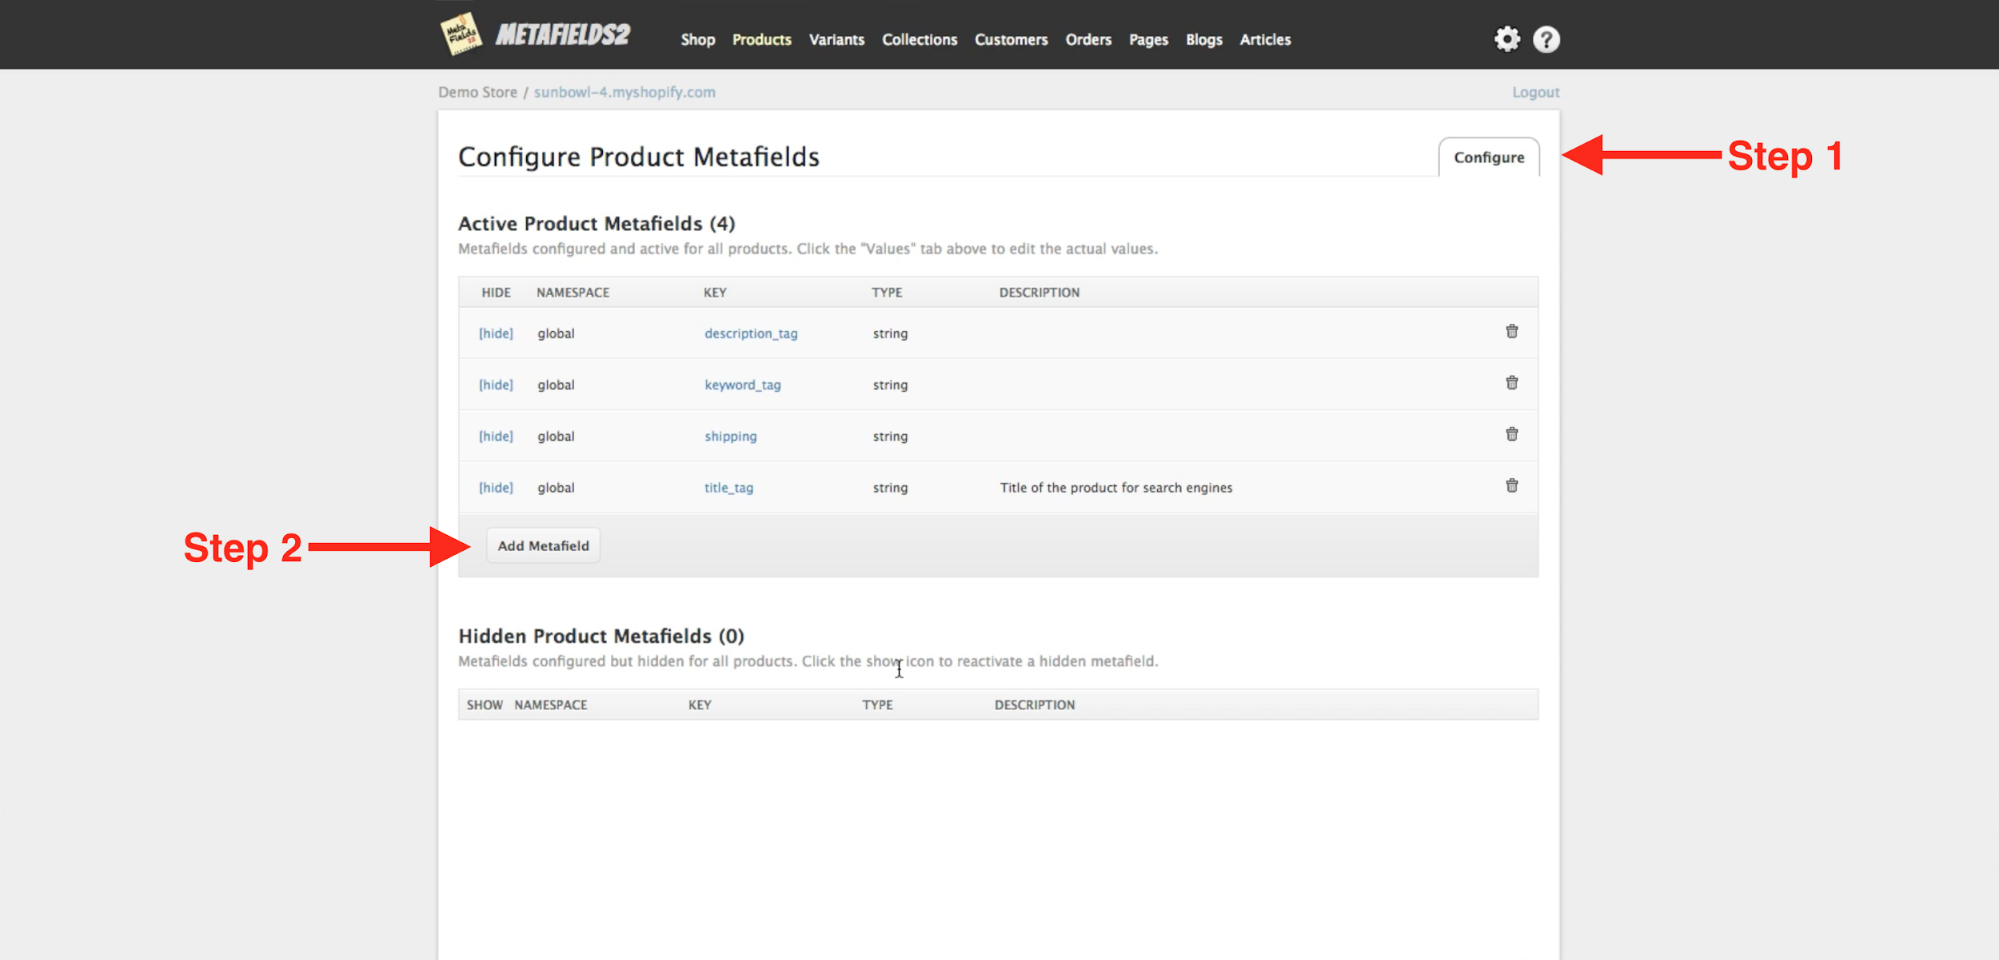 Merchant is setting up new metafields within the Metafields2 app from the Shopify app store